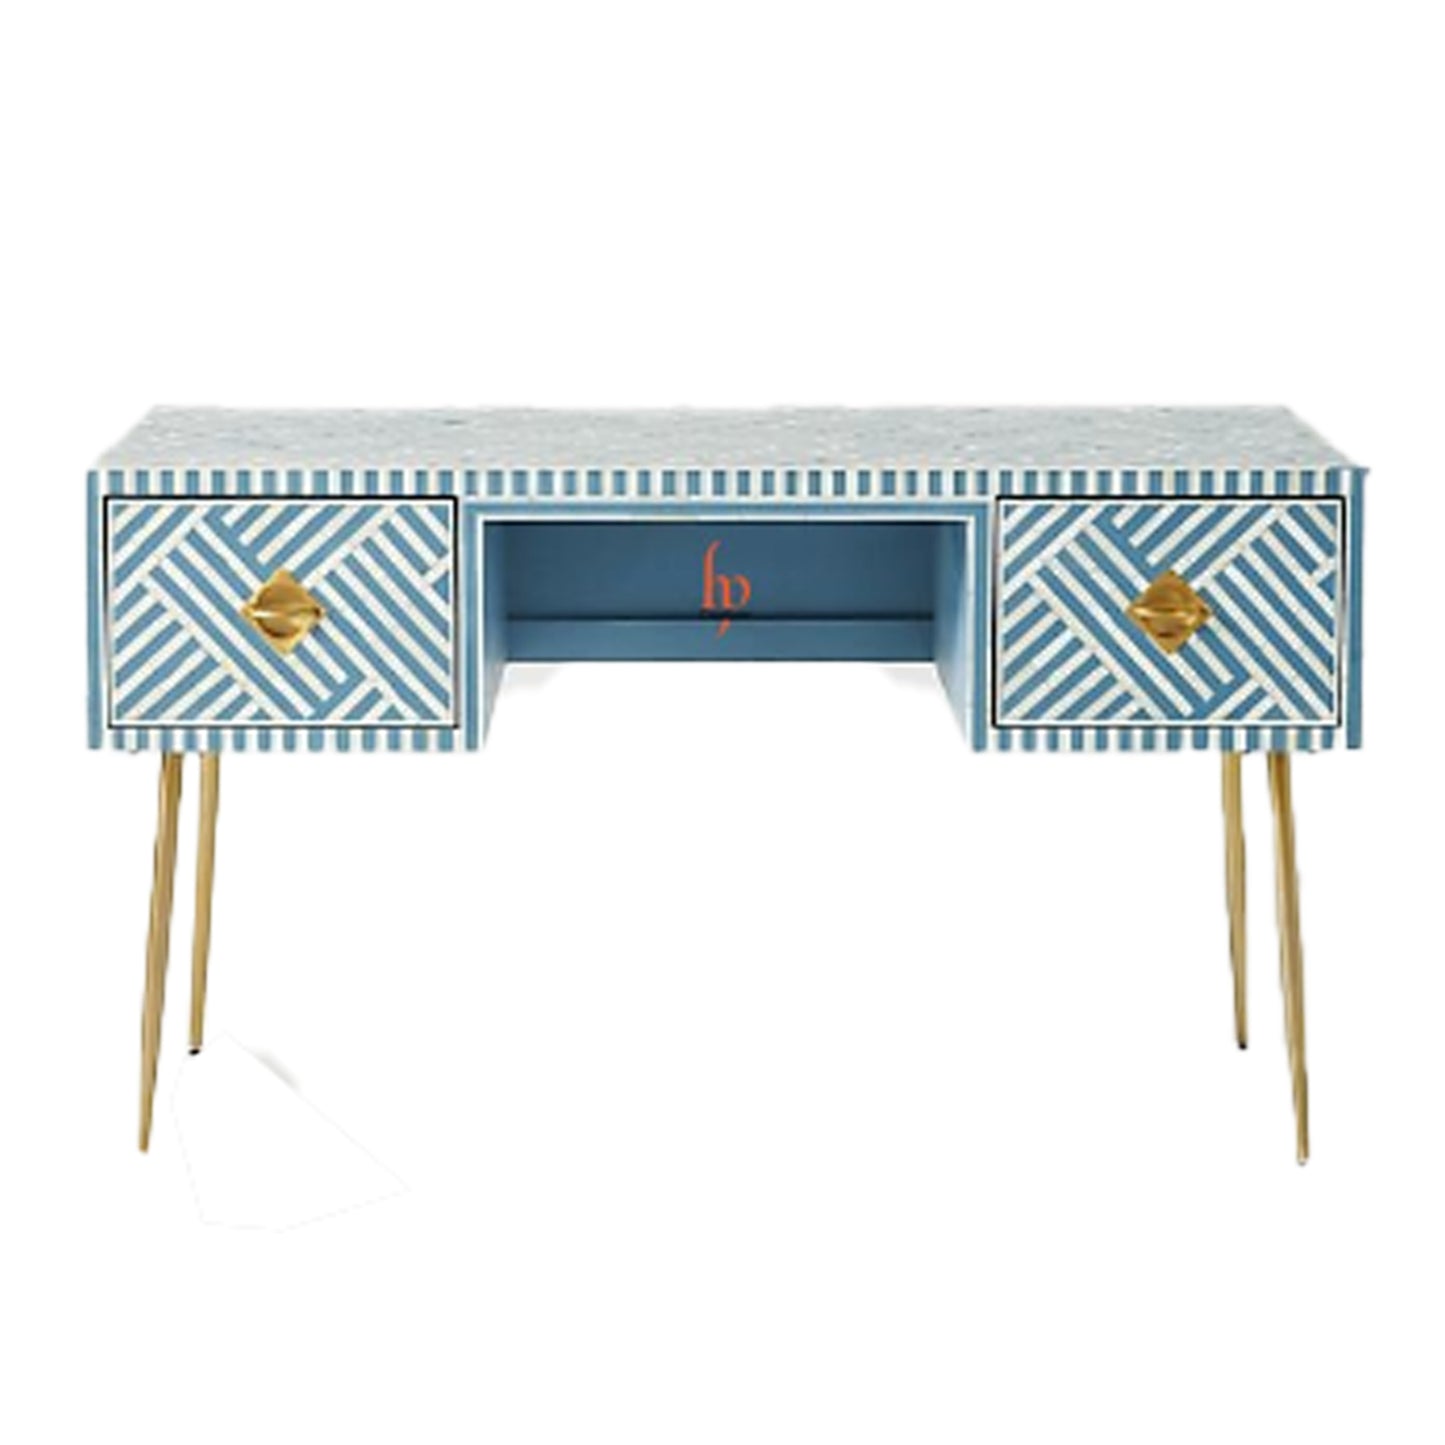 Handmade Stripe Design Optical Console Bone Inlay Antique 2 Drawers Study Desk Furniture Available in Black or Blue Colours